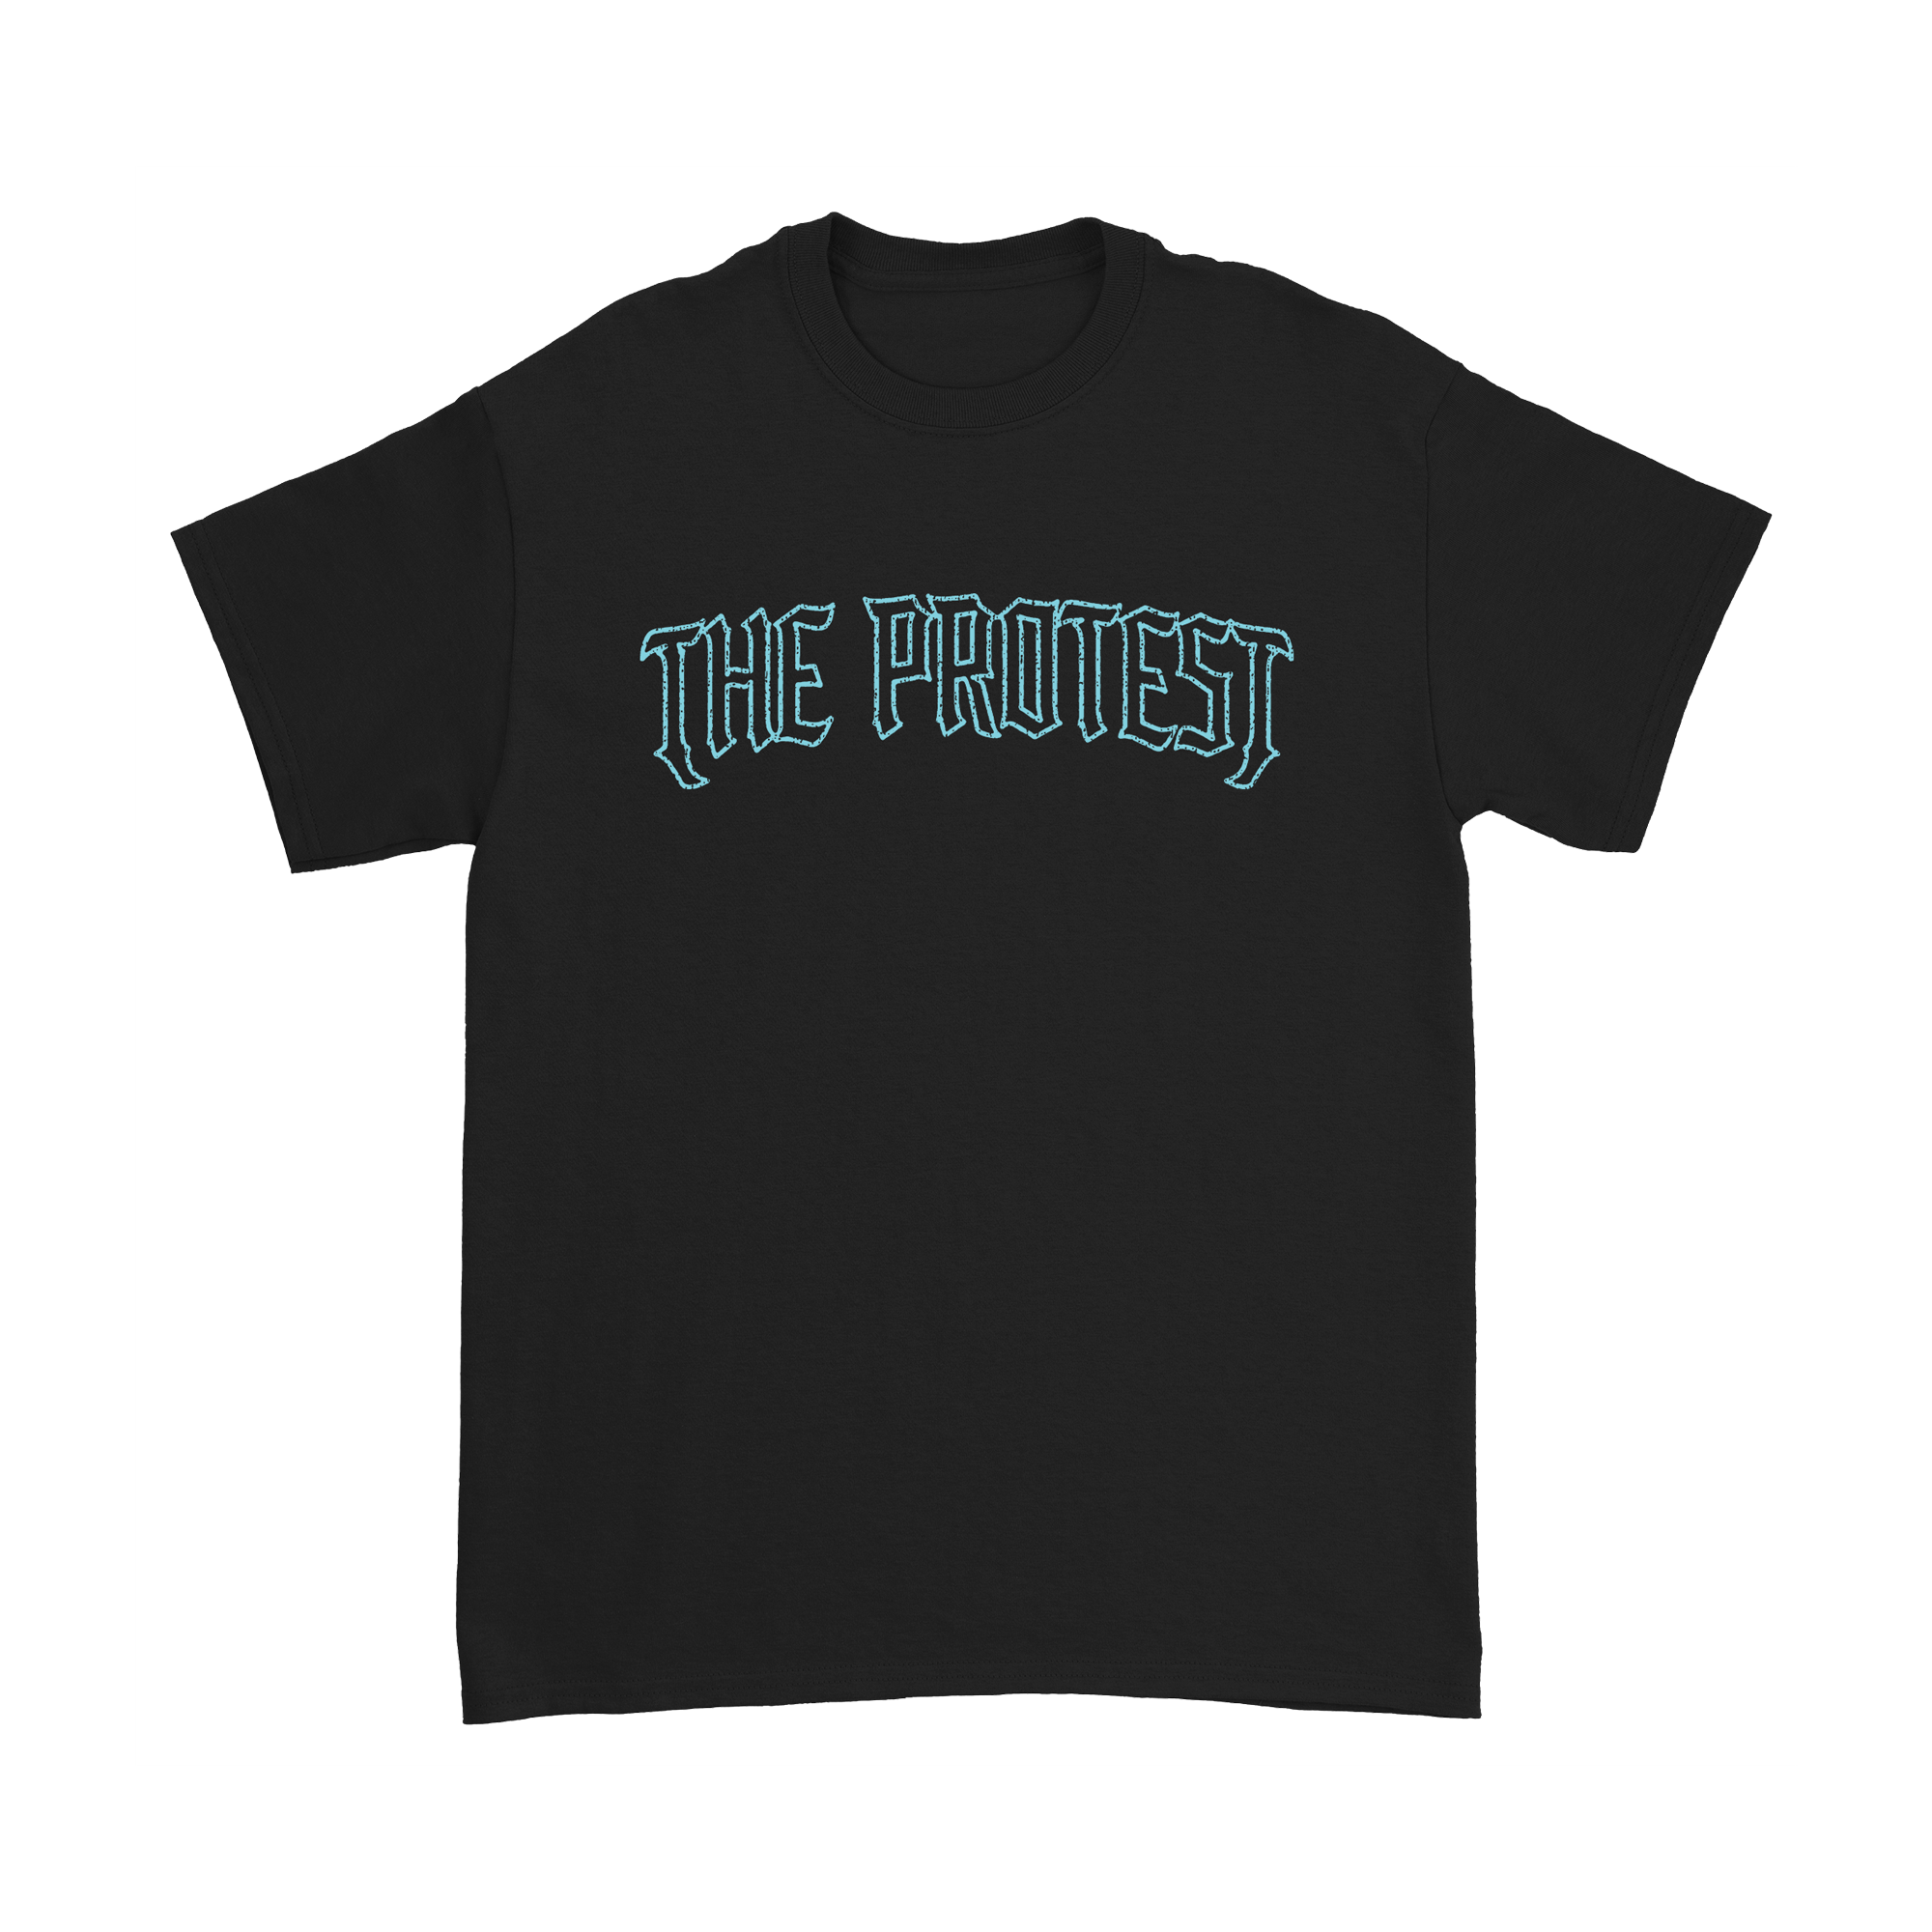 The Protest - Coffin T-Shirt